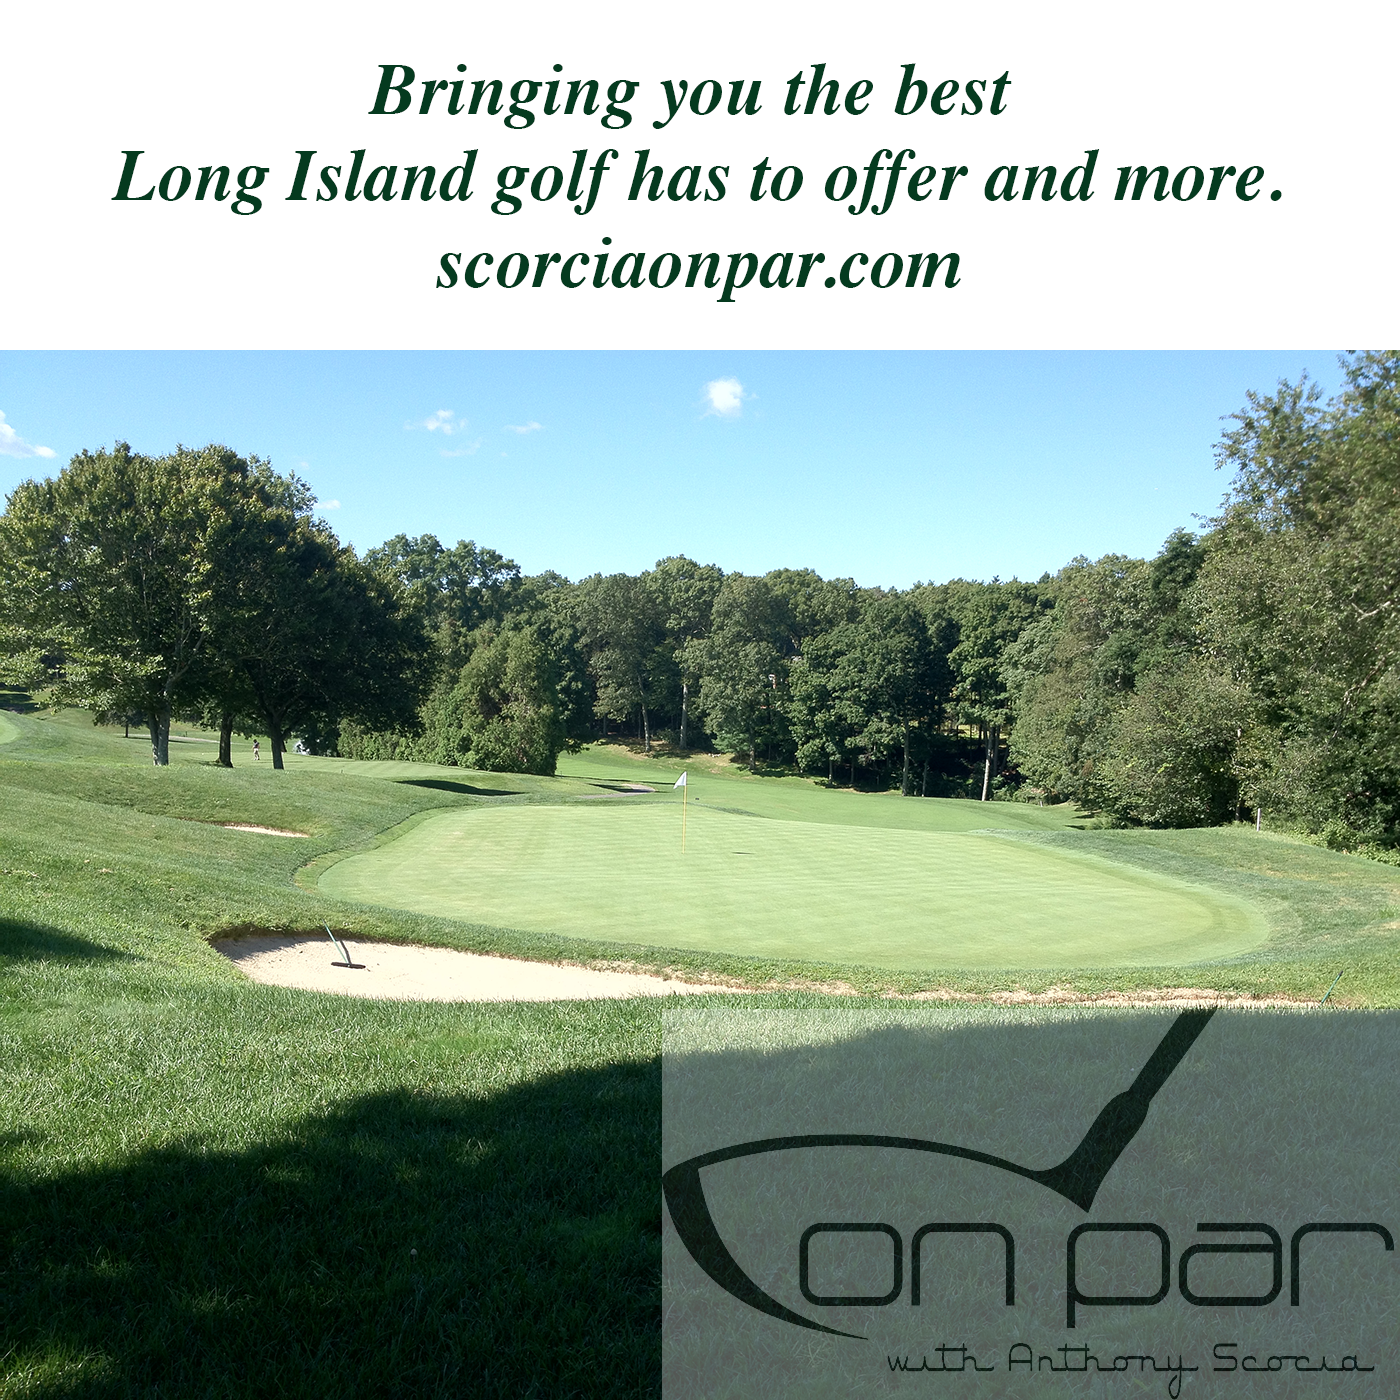 3.5 Woody Lashen reports on Merion Golf Club